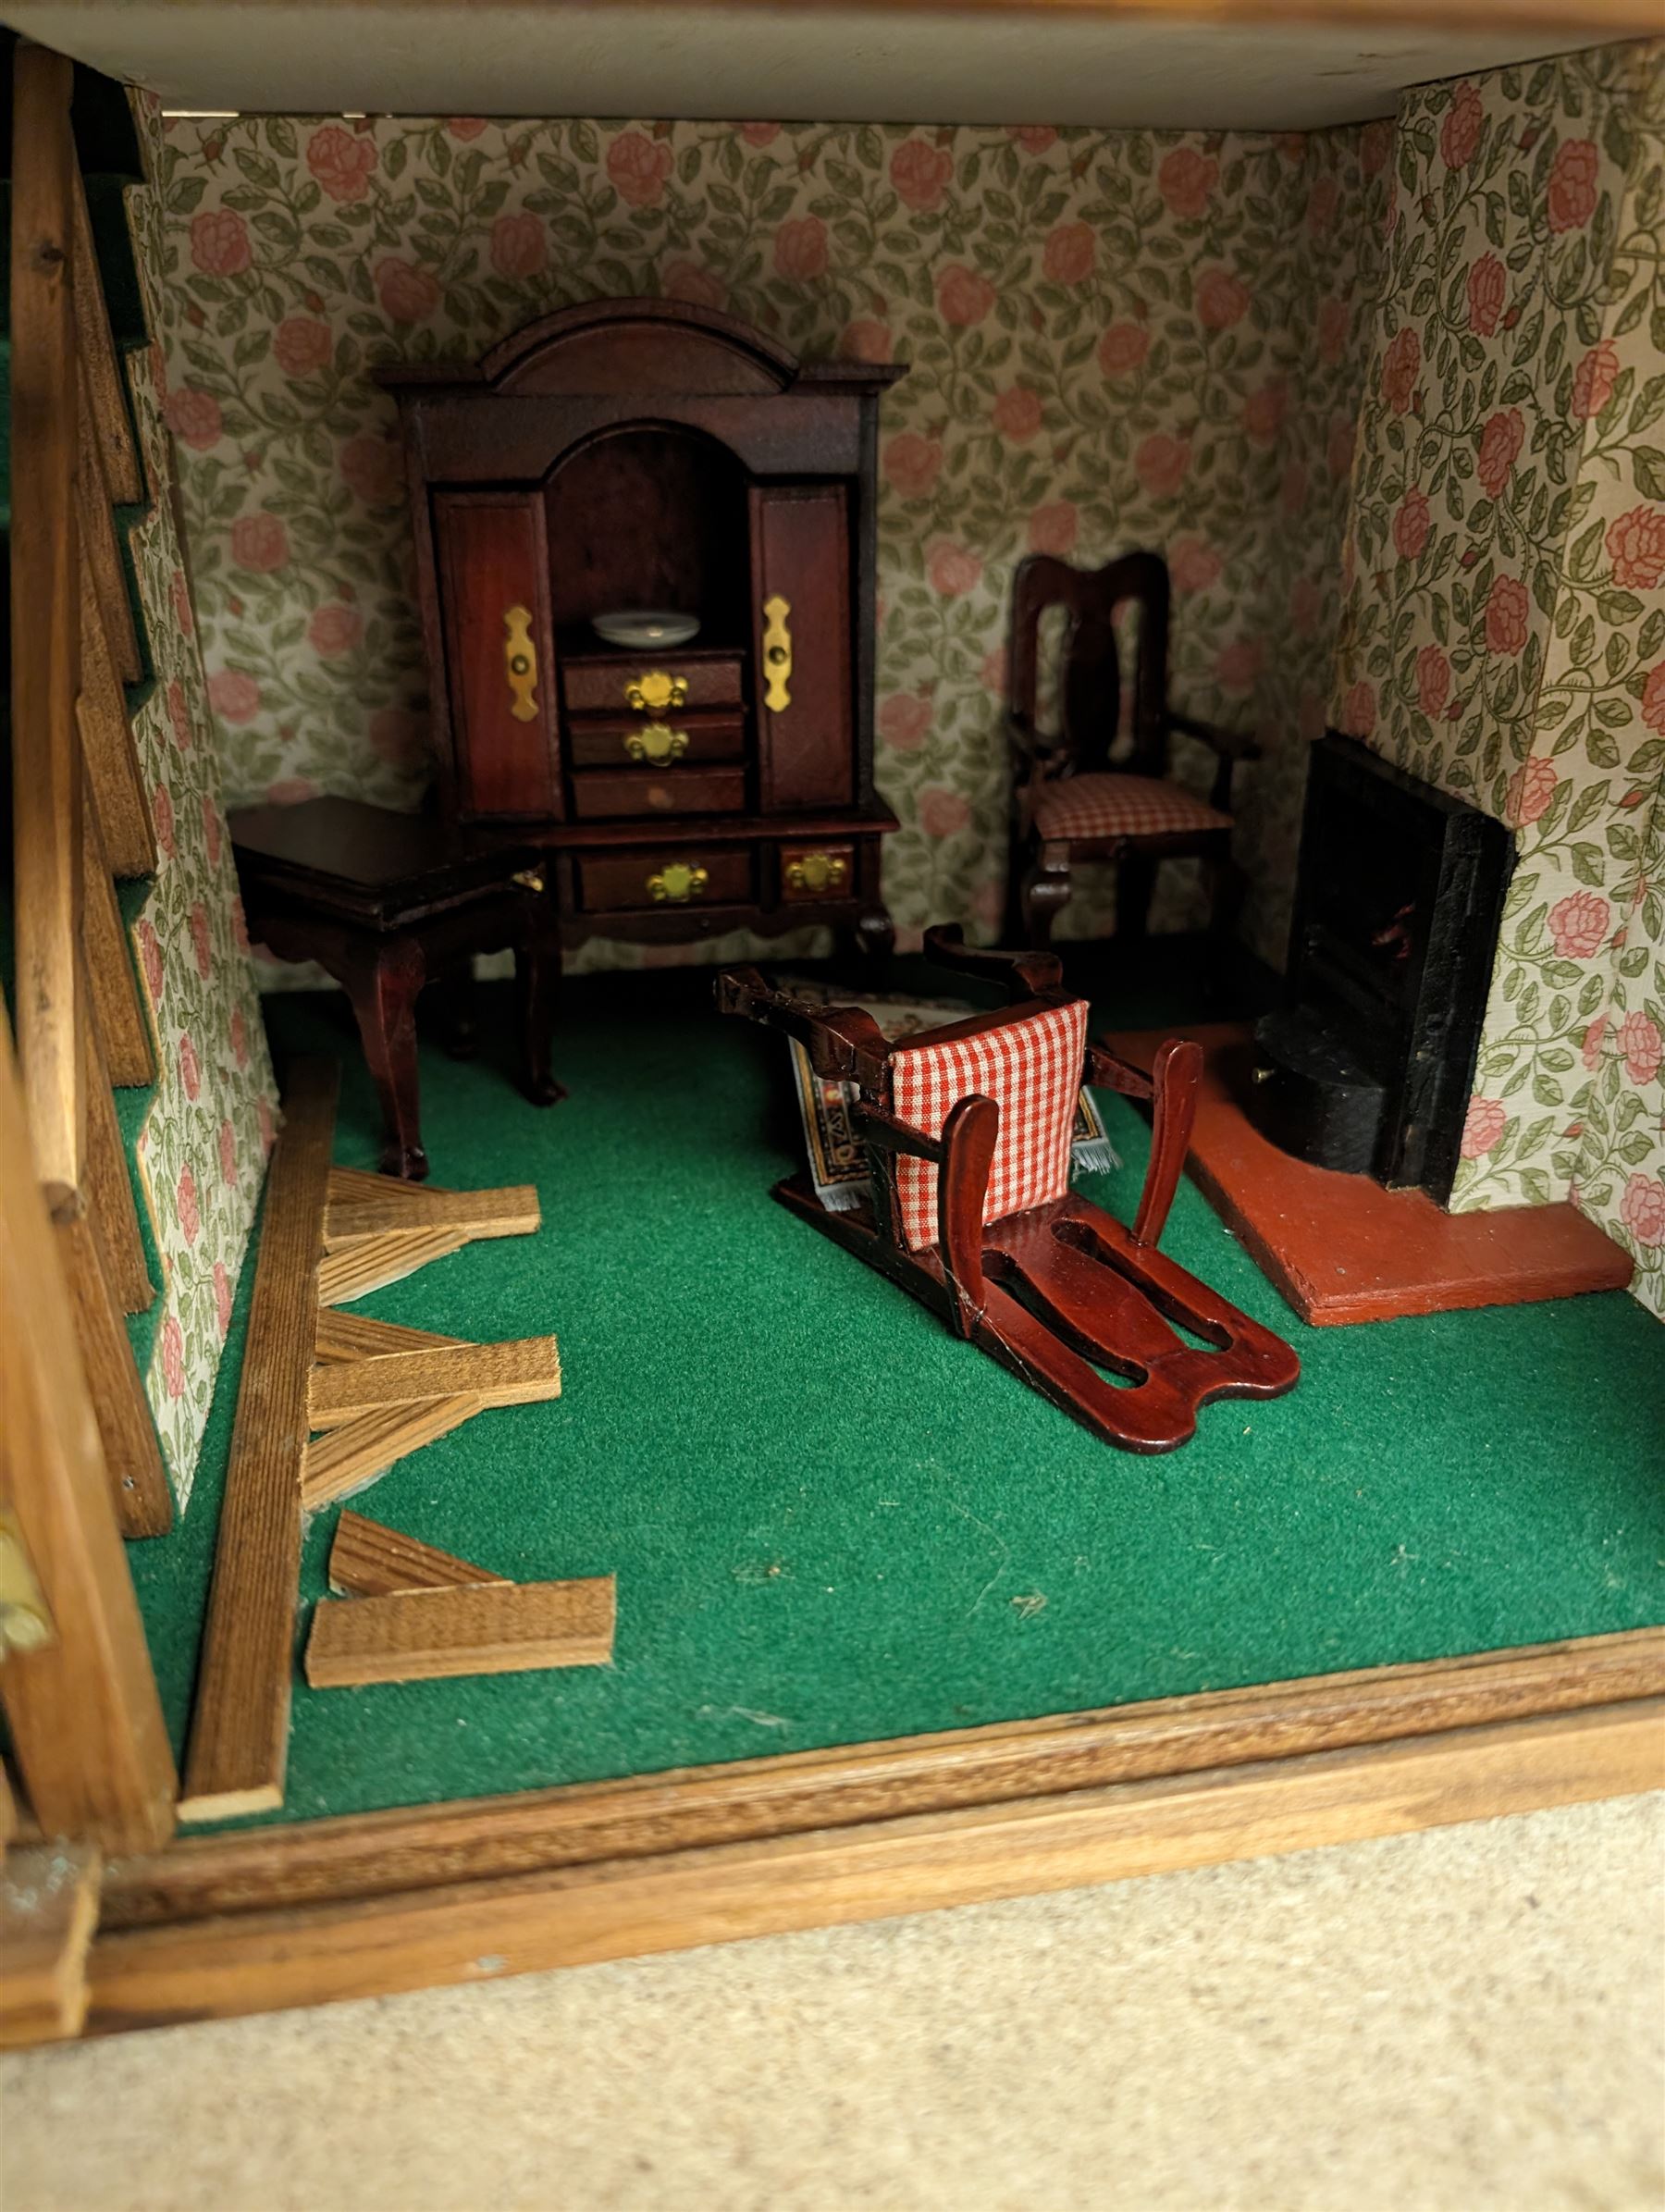 Two storey wooden dolls house with sliding panels - Image 2 of 7